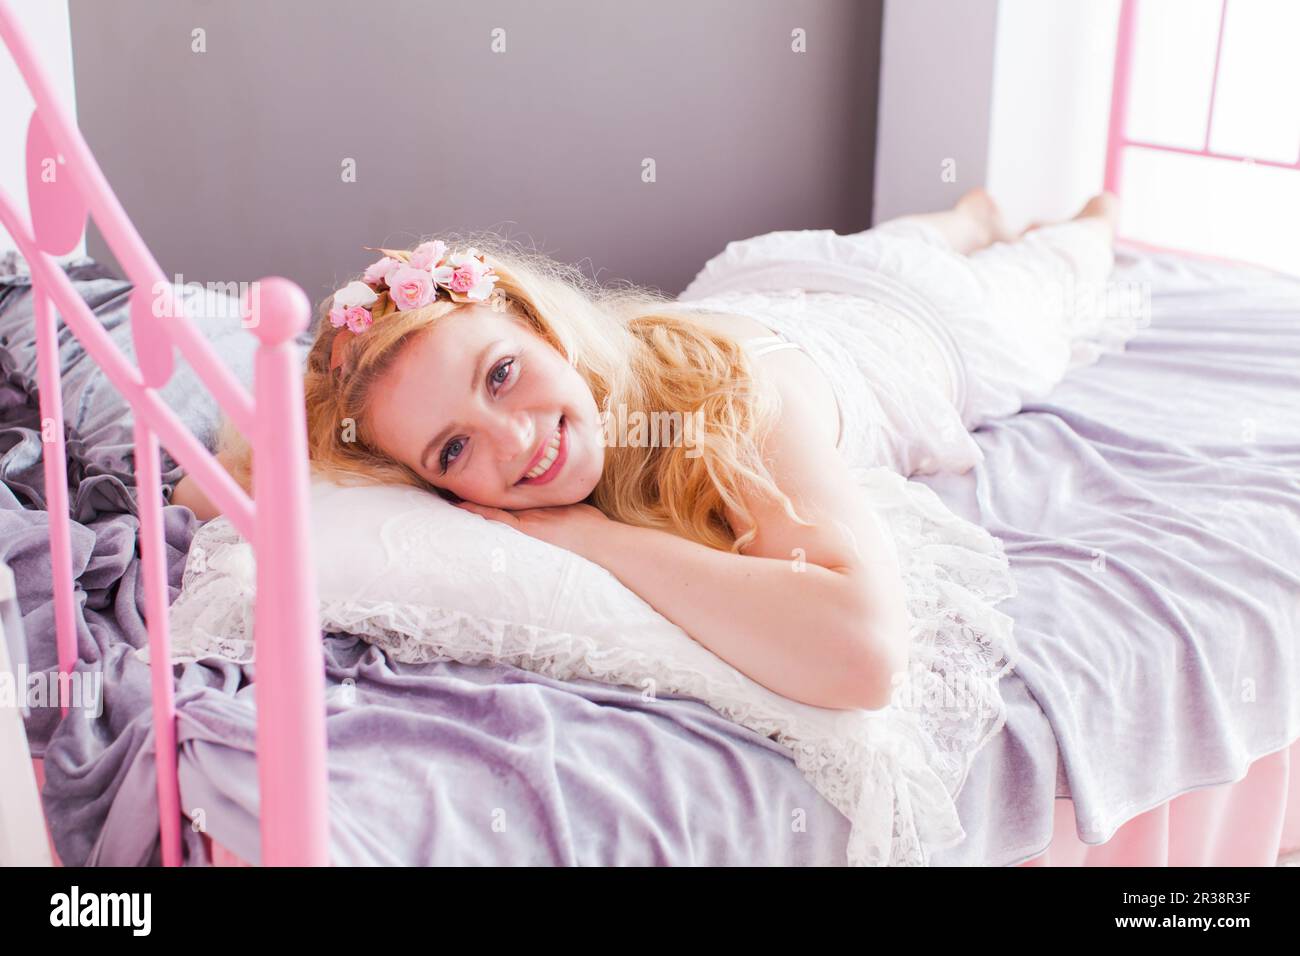 Good mood for the whole day in the room Stock Photo